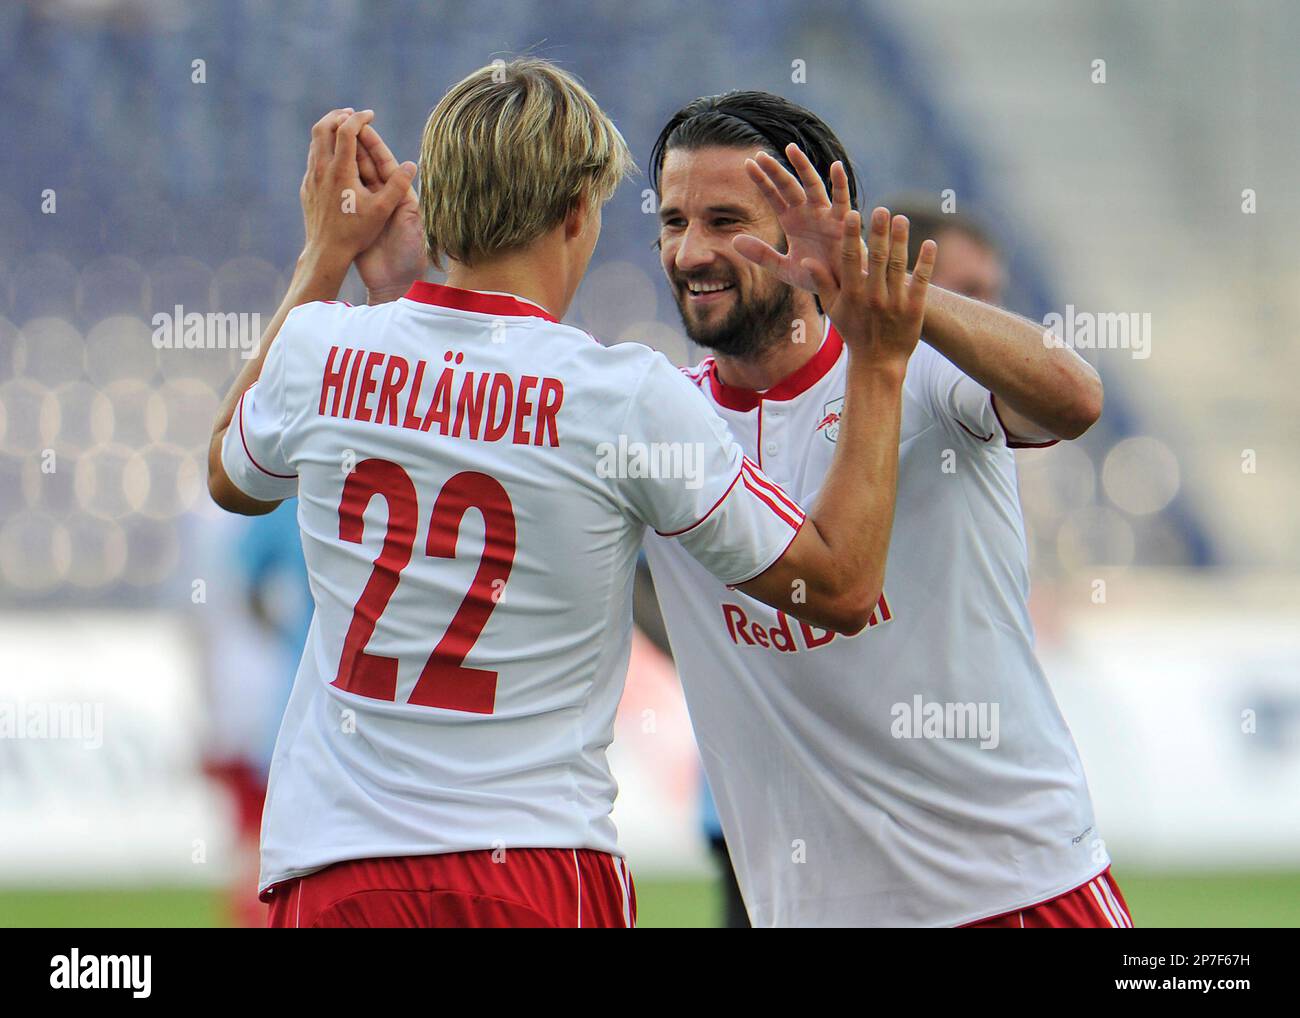 Salzburg's players Stefan Hierlaender, left, and his team mate Simon  Cziommer celebrate after scoring during a Champions League second round  qualification match between Red Bull Salzburg and HB Torshavn of Faroe  Islands